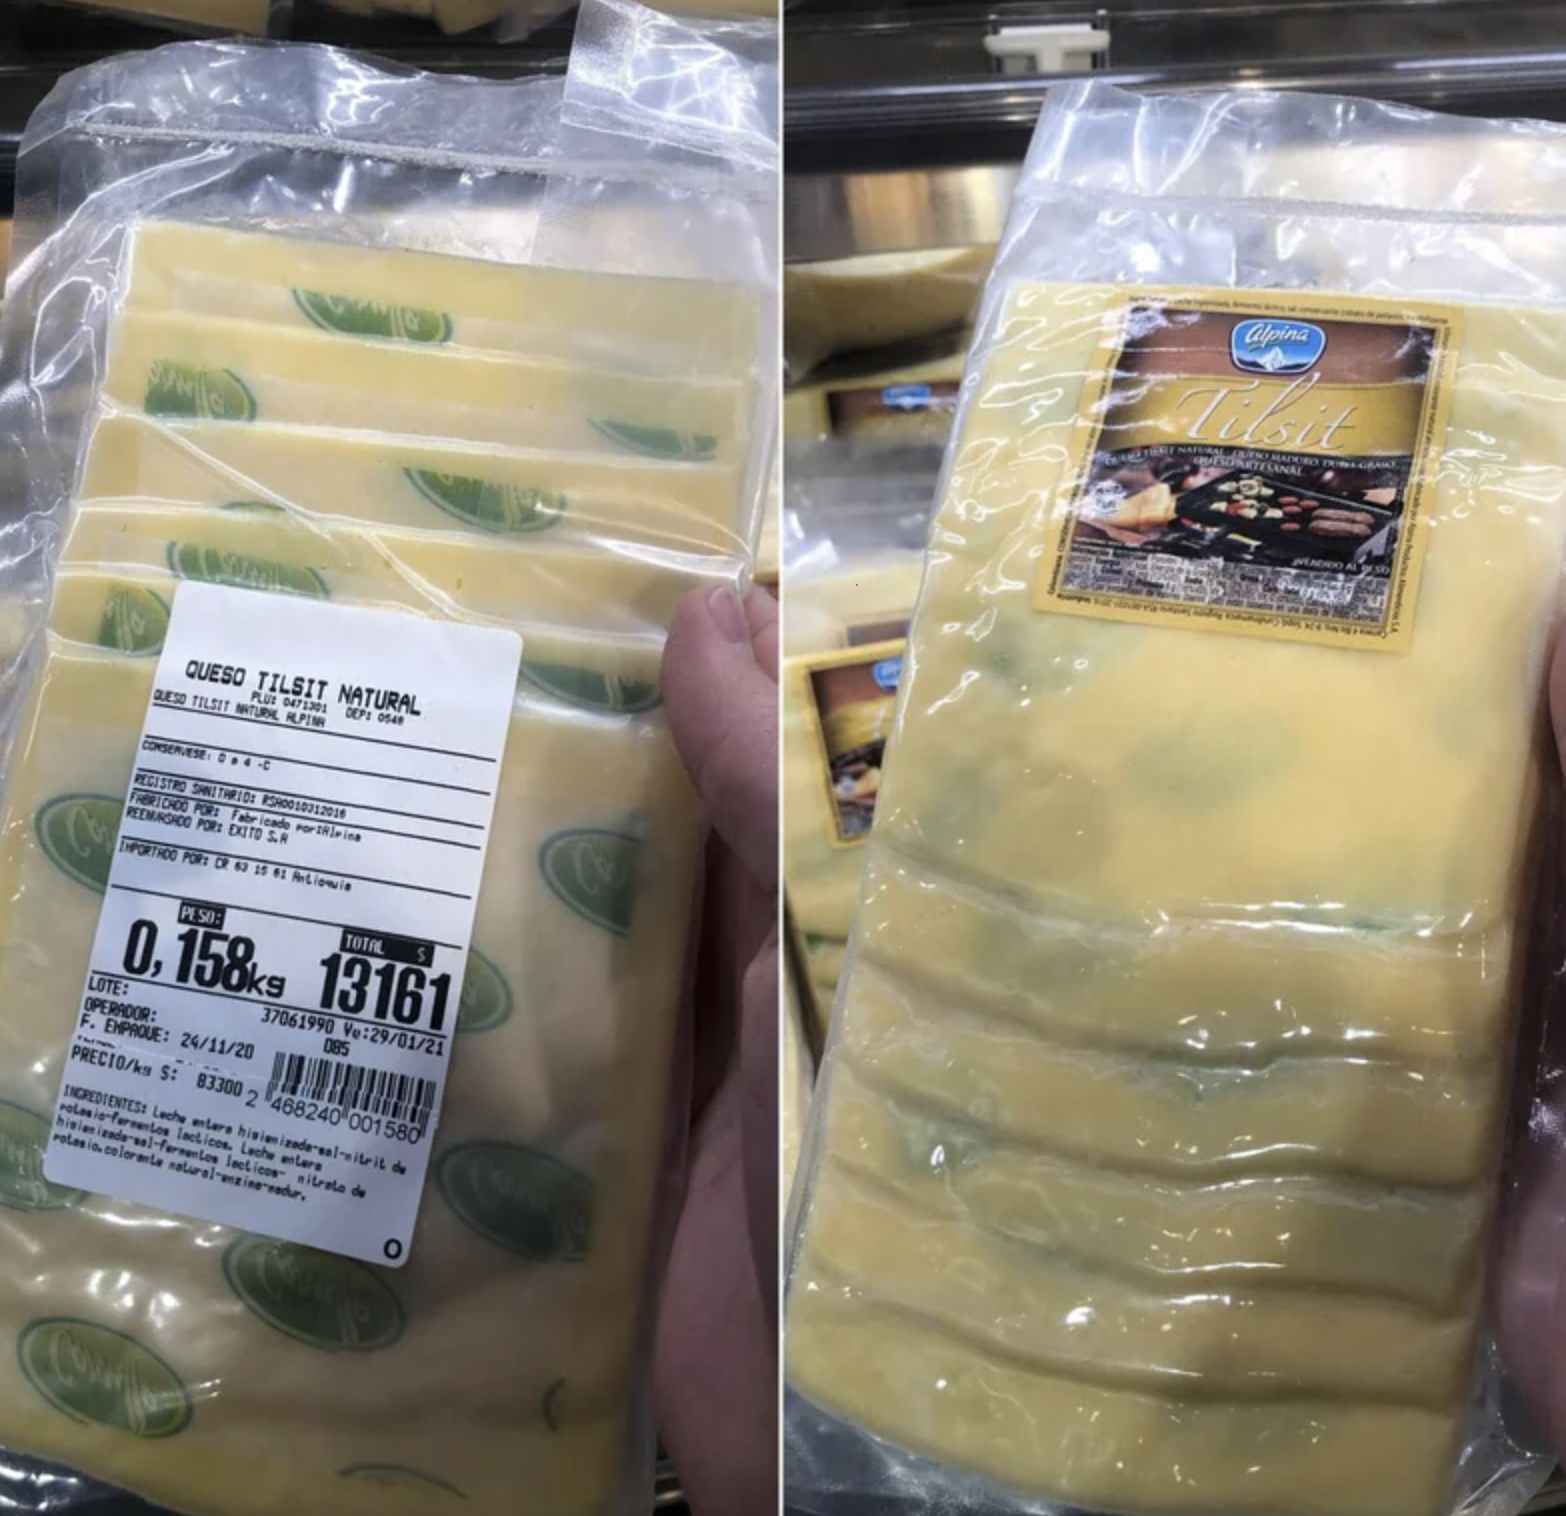 A packet of cheese slices that look like they have mold on them